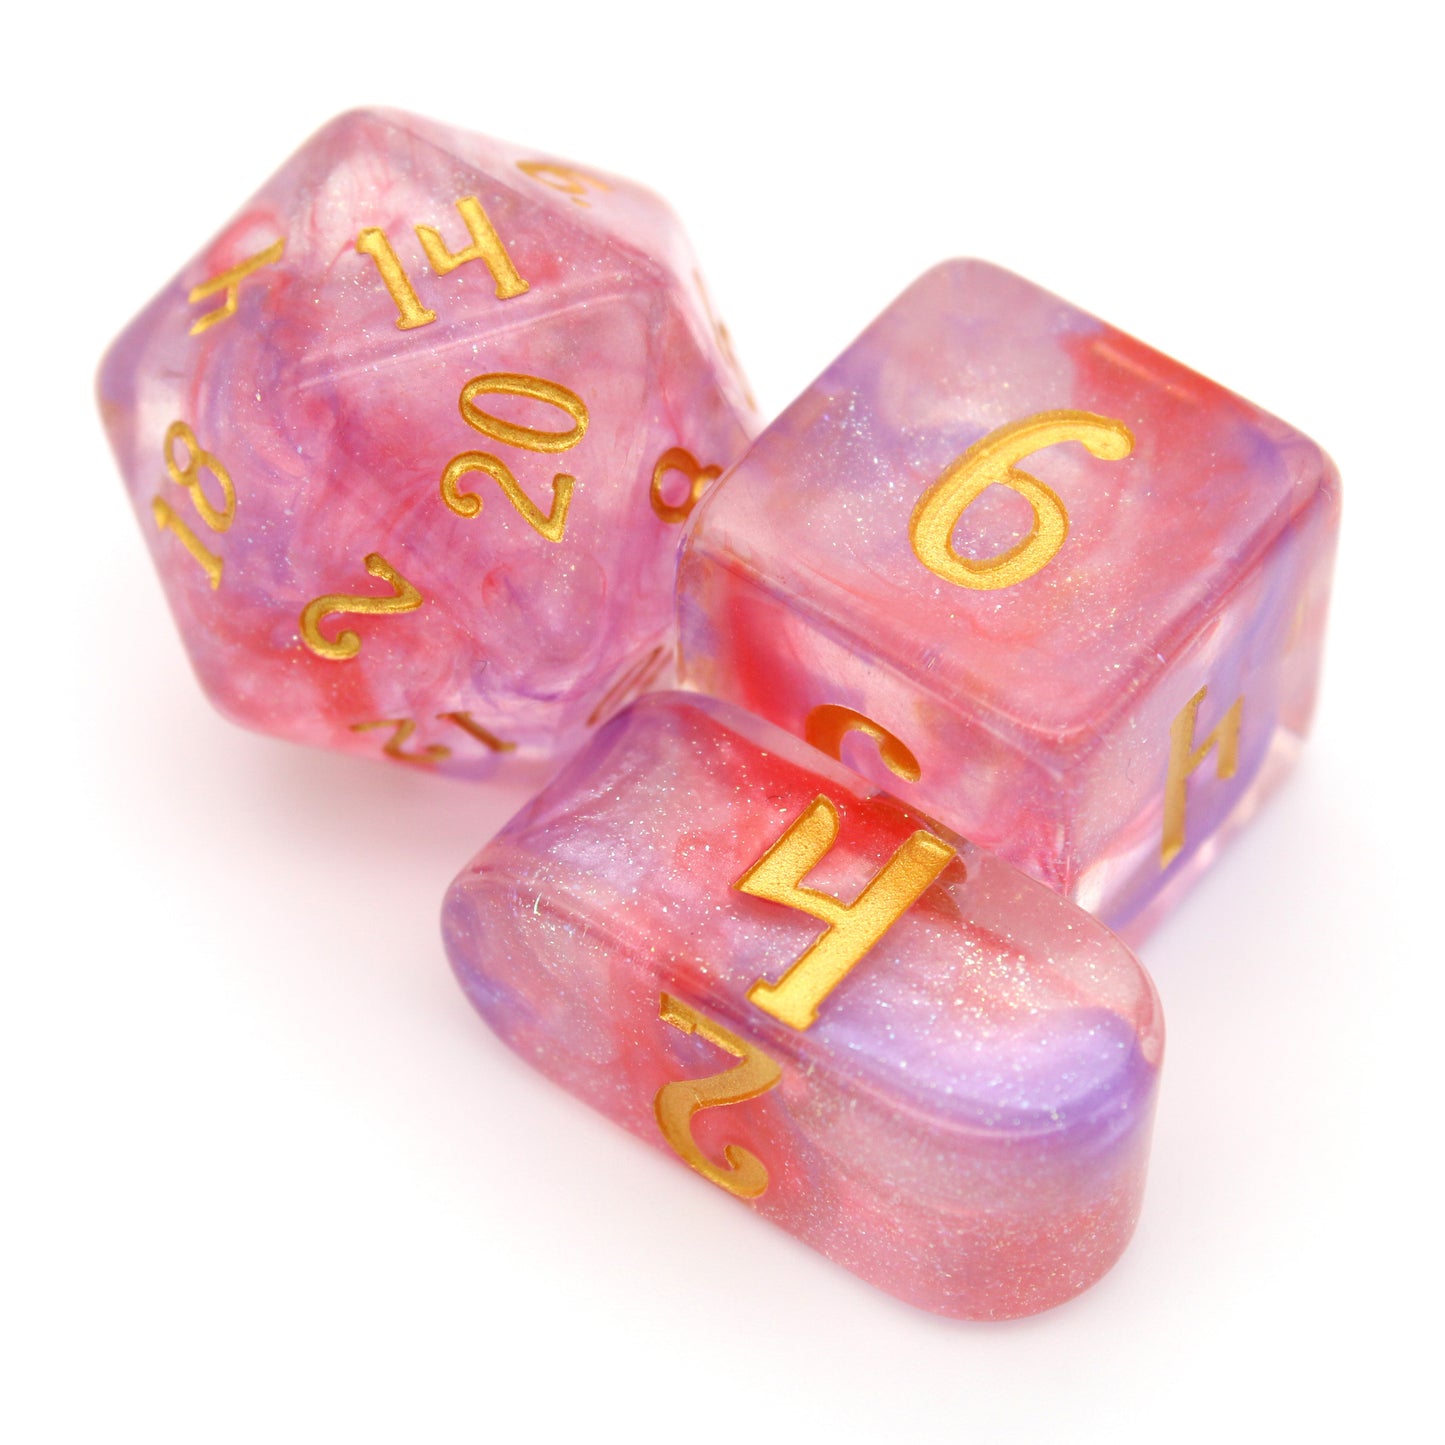 Fae Fight Club is a 10-piece resin set with swirls of pink, purple, and... is that blood? Inked in pixie-dust-gold.